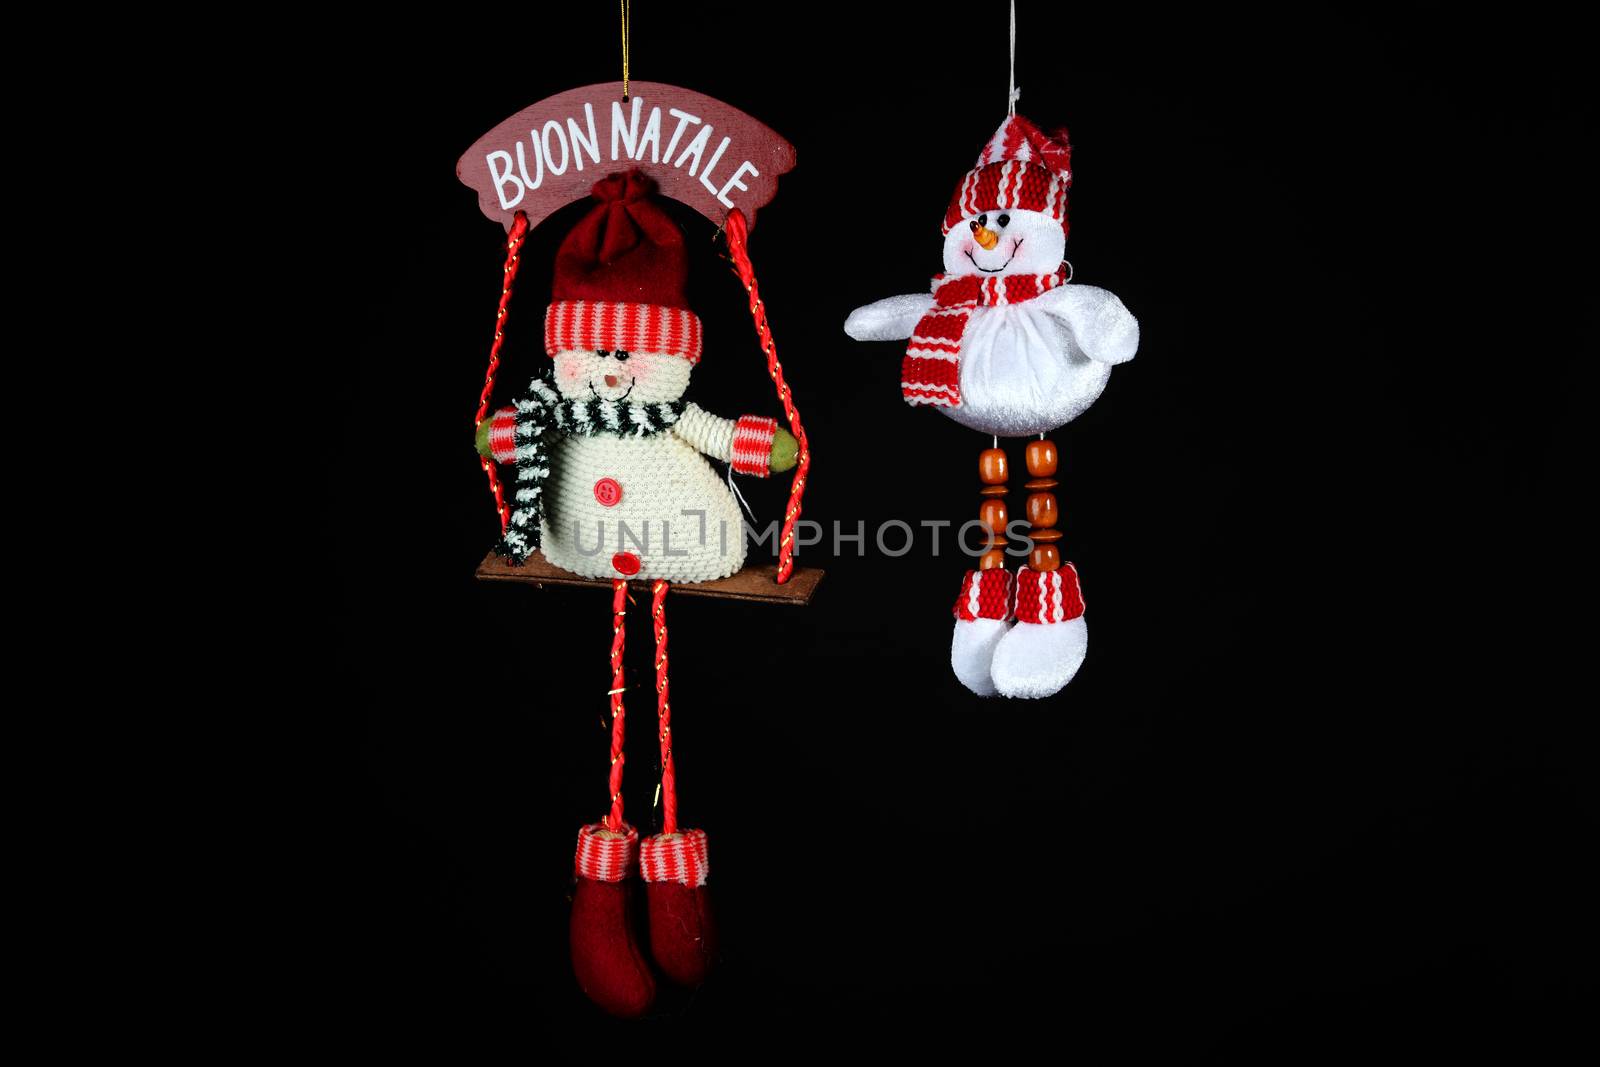 Christmas decorations to hang on the Christmas tree on a black background